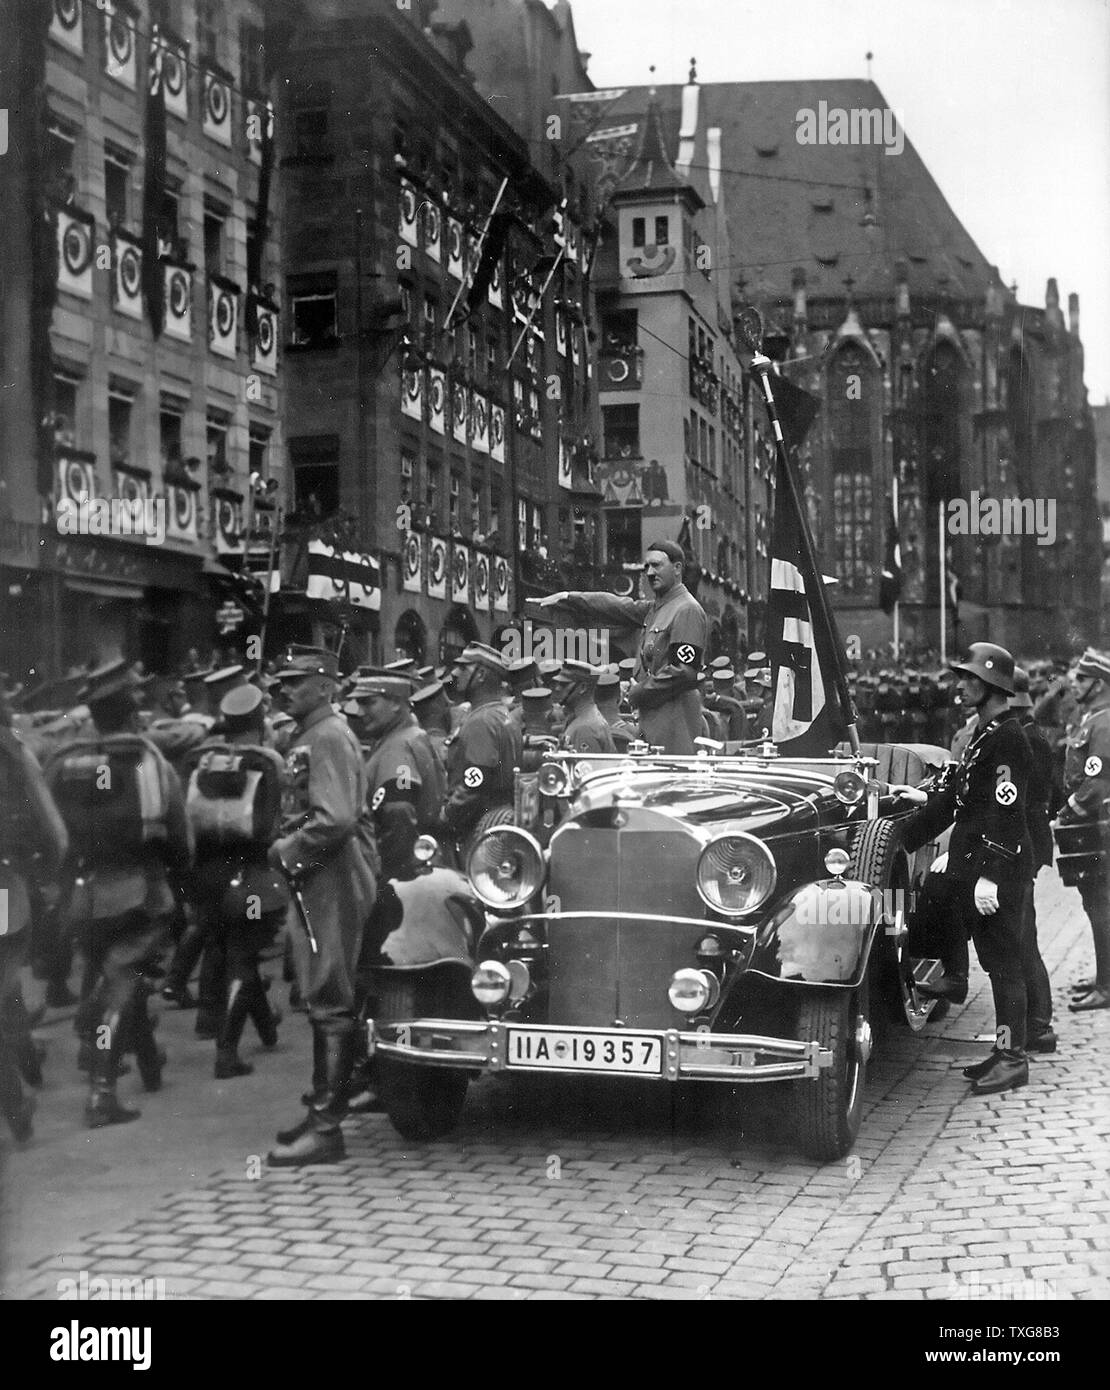 Adolf Hitle, Austrian-born German Chancellor, standing in a car taking the salute at a parade of SA troops, Nuremberg Stock Photo